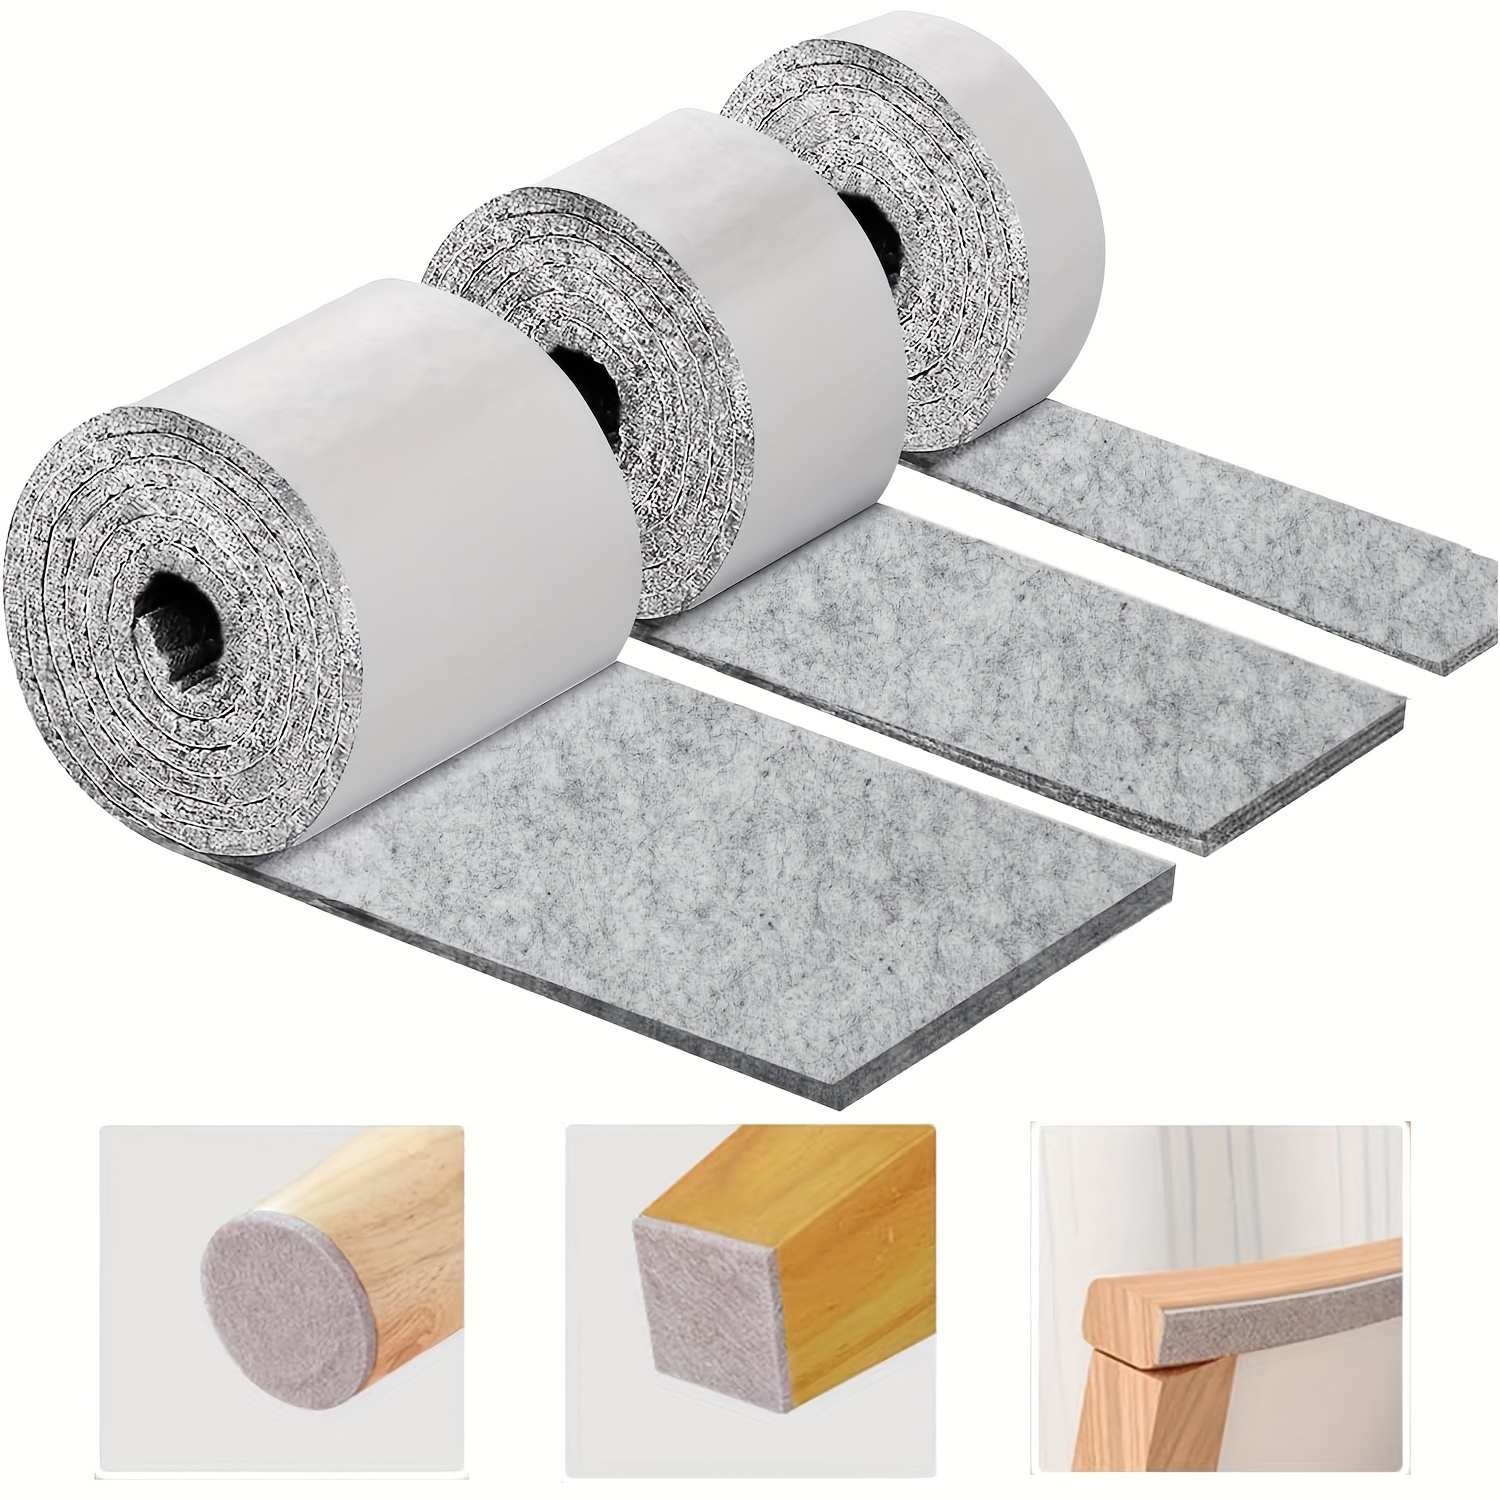 

Self-adhesive Felt Furniture Pads Roll, Multi-use Floor Protector Pad For Hardwood, Durable Scratch Prevention Strips For Cabinets, Tables, Chairs, Craft - Other Material, Metal Finish Type